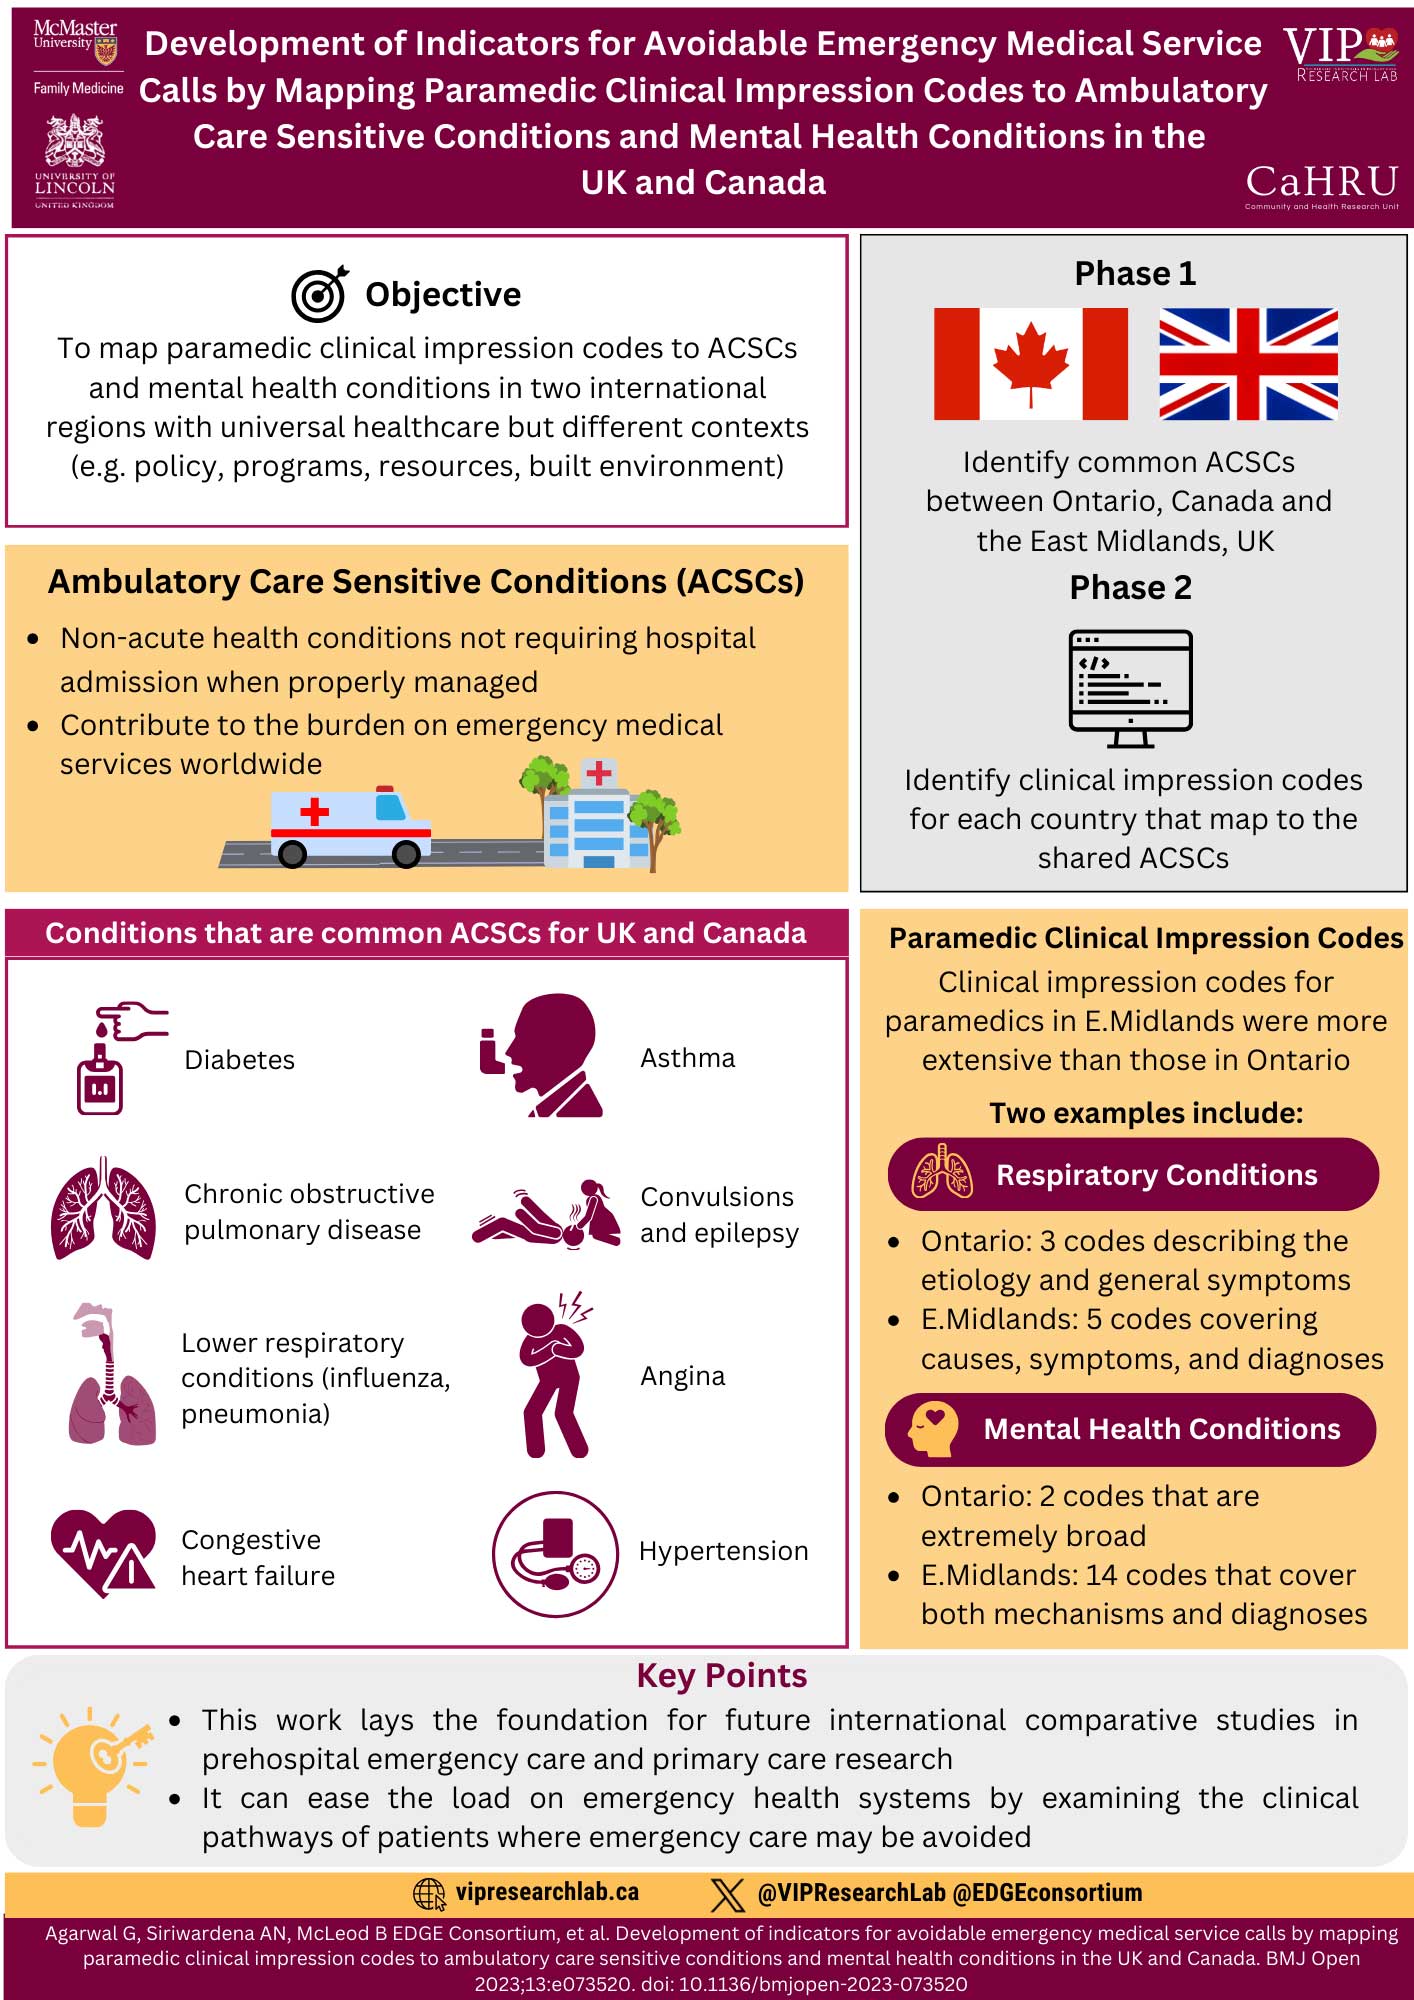 The title written at the top of this infographic is Development of Indicators for Avoidable Emergency Medical Service Calls by Mapping Paramedic Clinical Impression Codes to Ambulatory Care Sensitive Conditions and Mental Health Conditions in the UK and Canada. Beside the title, on the left are the logos for McMaster University Family Medicine and the University of Lincoln United Kingdom. To its right are logos for the VIP Research Lab and Community and Health Research Unit. Below the title are two columns. At the top of the left column in a box outlined in burgundy is a subheading titled Objective with an icon to its left of a dart board with a dart in the center. Below that is a yellow box with the subheading Ambulatory Care Sensitive Conditions (ACSCs) with two bullet points beneath it that say Non-acute health conditions not requiring hospital admission when properly managed and Contribute to the burden on emergency medical services worldwide. Below these points, in the same yellow box is an icon of an ambulance driving to a hospital. Underneath the yellow box is a box outlined in burgundy, with the subheading Conditions that are common ACSCs for the UK and Canada written in white on a burgundy banner. Within this box, there are two columns with 4 burgundy icons each and text in black beside them. On the left is an icon of a glucose blood test being administered on someone's finger with the word diabetes beside it. Below is an icon representing lungs with the text Chronic obstructive pulmonary disease beside it. Under that is an icon representing the respiratory tract with text beside it saying Lower respiratory conditions (influenza, pneumonia). Below that is an icon of a heart with an electrical signal running through it and a caution symbol beside it. The text beside that says Congestive heart failure. In the right column of the box outlined in burgundy is an icon of a person using an inhaler with the text asthma written beside it. Below that is an icon of someone on the floor experiencing a seizure with another person holding their head. The text beside it says Convulsions and epilepsy. Below that is an icon of a person clutching their heart with text beside it saying Angina. Under that is an icon of a blood pressure monitor with the text Hypertension beside it. Below the infographic title in the right column is a grey box with the subheading Phase 1 in bold. Beneath that is a flag of Canada and the United Kingdom with text below it that says Identify common ACSCs between Ontario, Canada, and the East Midlands, UK. Below that is a second subheading in the same box titled Phase 2 in bold with an icon of a computer below it and text saying Identify clinical impression codes for each country that map to the shared ACSCs below that. Below the grey box is a yellow box with the subheading Paramedic Clinical Impression Codes with text below it saying Clinical impression codes for paramedics in E.Midlands were more extensive than those in Ontario. There is another subheading below that says Two examples include: In an elongated burgundy oval background there is text saying Respiratory Conditions. There are two bullet points beneath that with text that says Ontario: 3 codes describing the etiology and general symptoms and E.Midlands: 5 codes covering causes, symptoms, and diagnoses. Below that is another elongated burgundy oval with an icon of a person’s head with a heart symbol in their brain and text in white beside it saying Mental Health Conditions. Below that are two bullet points saying Ontario: 2 codes that are extremely broad and E.Midlands: 14 codes that cover both mechanisms and diagnoses. Near the bottom of the page, there is a yellow box with the subheading Key Points in burgundy. Below that are two bullet points with text saying This work lays the foundation for future international comparative studies in prehospital emergency care and primary care research and It can ease the load on emergency health systems by examining the clinical pathways of patients where emergency care may be avoided. To the left of the bullet points is a yellow icon of a lightbulb with a key going through it. Across the bottom of the infographic from left to right is a website icon accompanied by the website name vipresearchlab.ca and the logo for the social media platform X accompanied by the handles @VIPResearchLab and @EDGEconsortium.